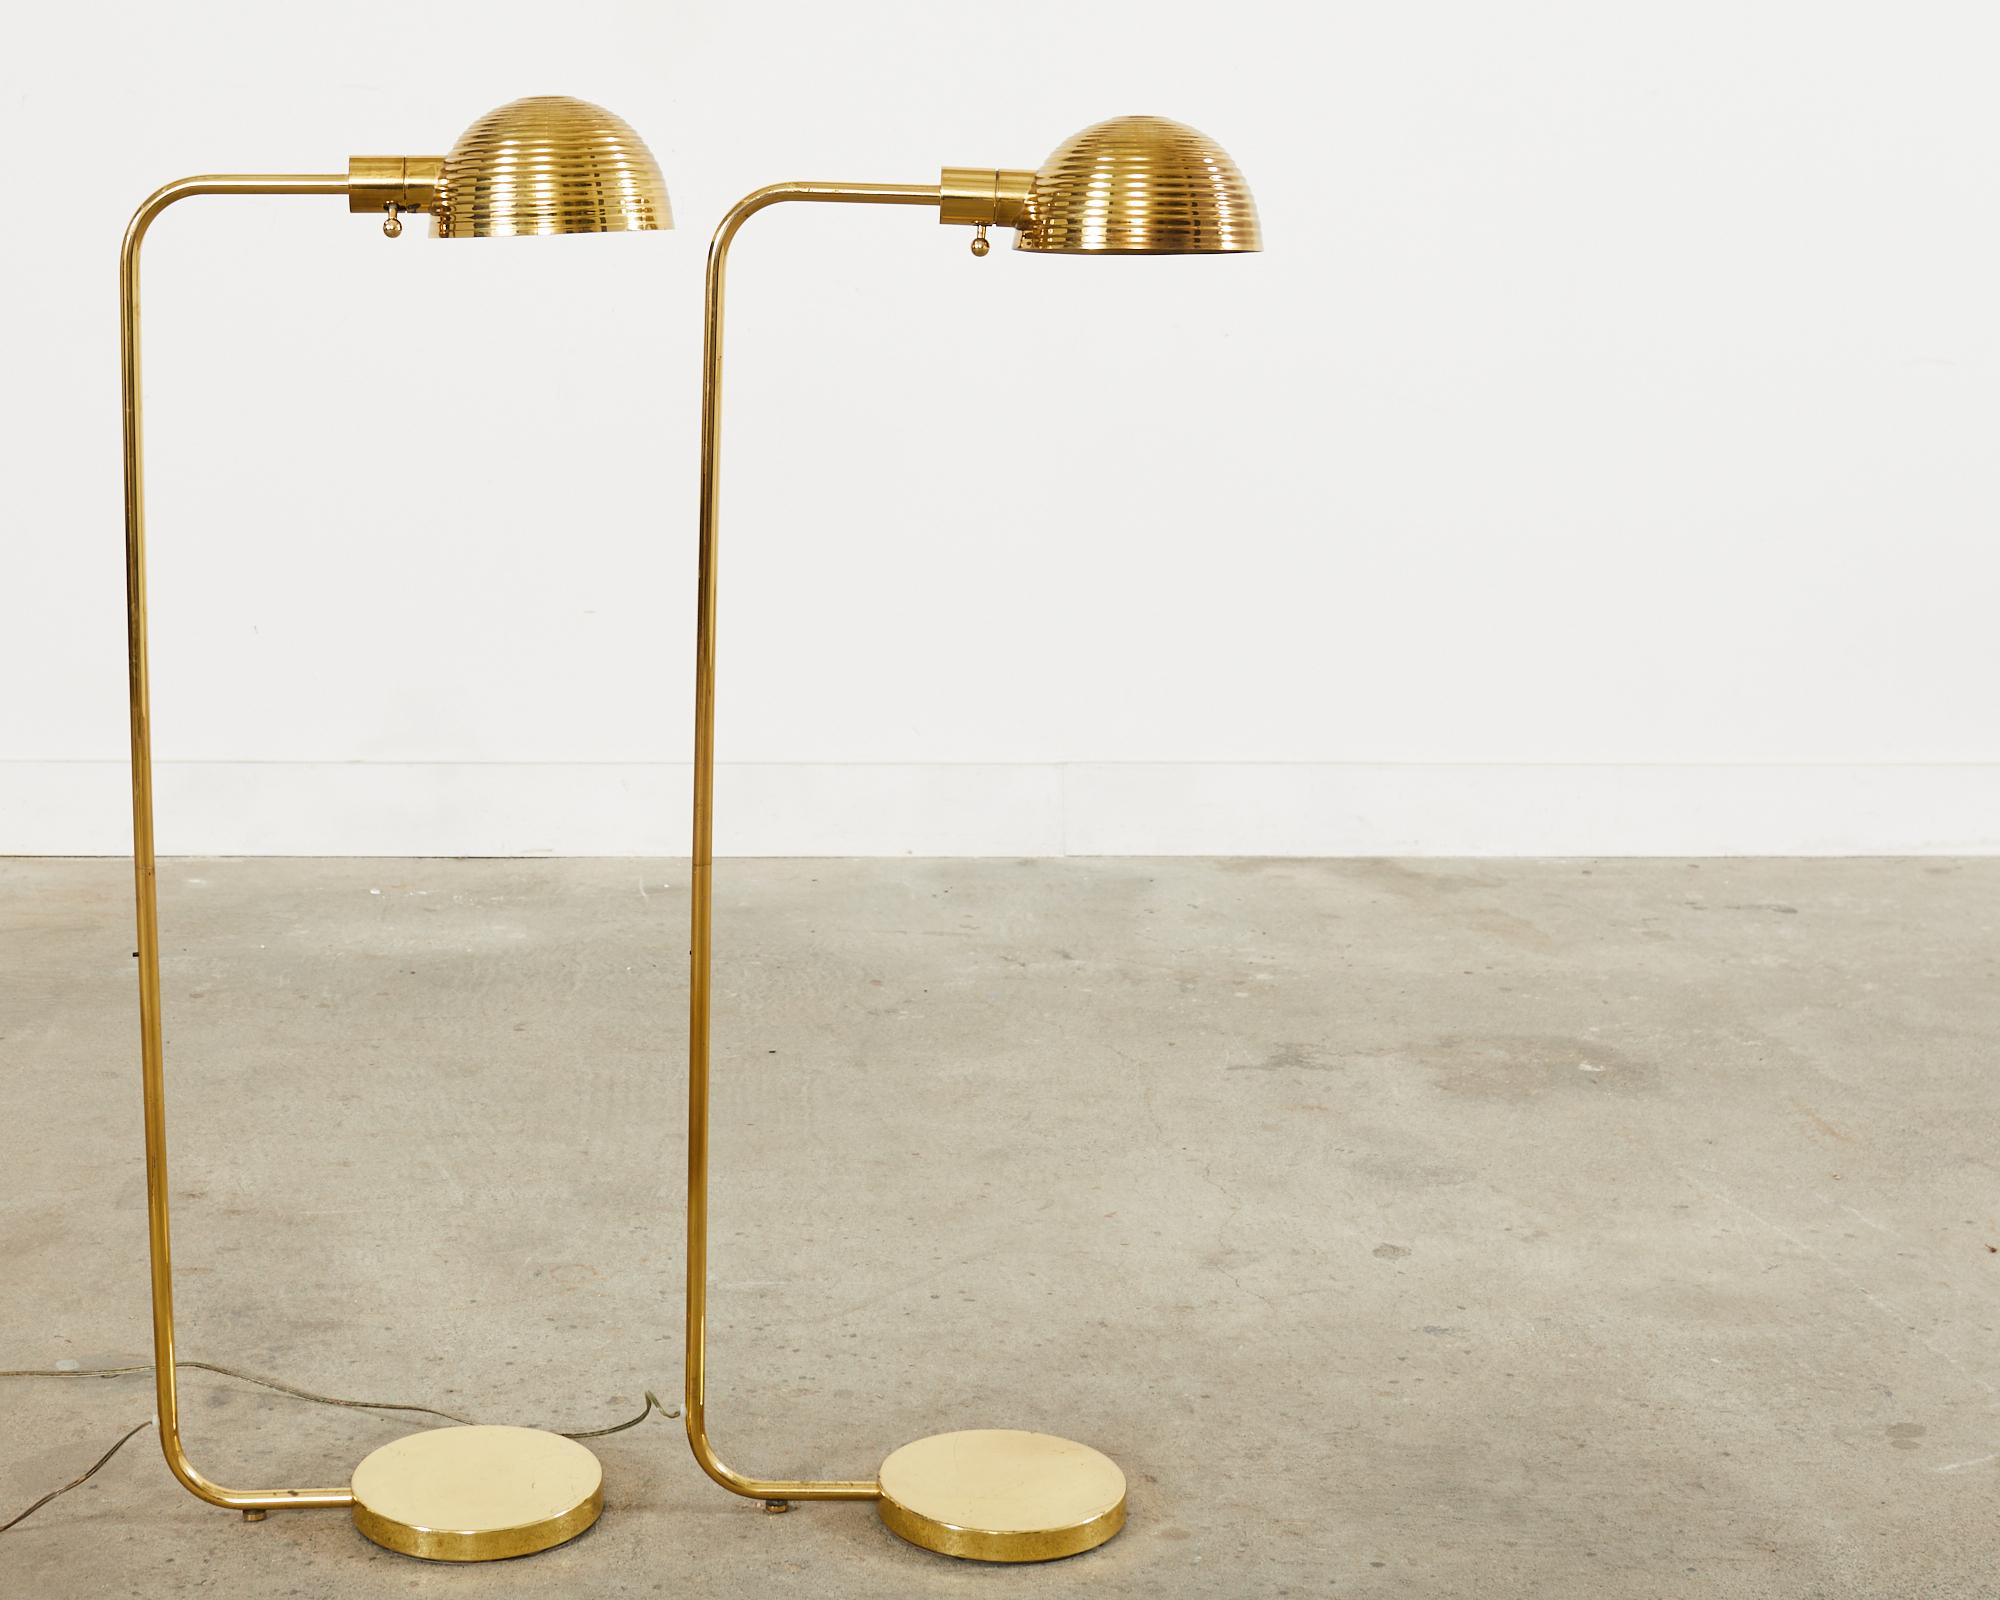 Stylish pair of brass task floor lamps designed by Harry Lawenda for Boyd Lighting Sausalito, CA. The matching pair of lamps feature a bee hive-shaped dome swivel shade with a reeded finish. The lights have a dimmer control switch and a gorgeous